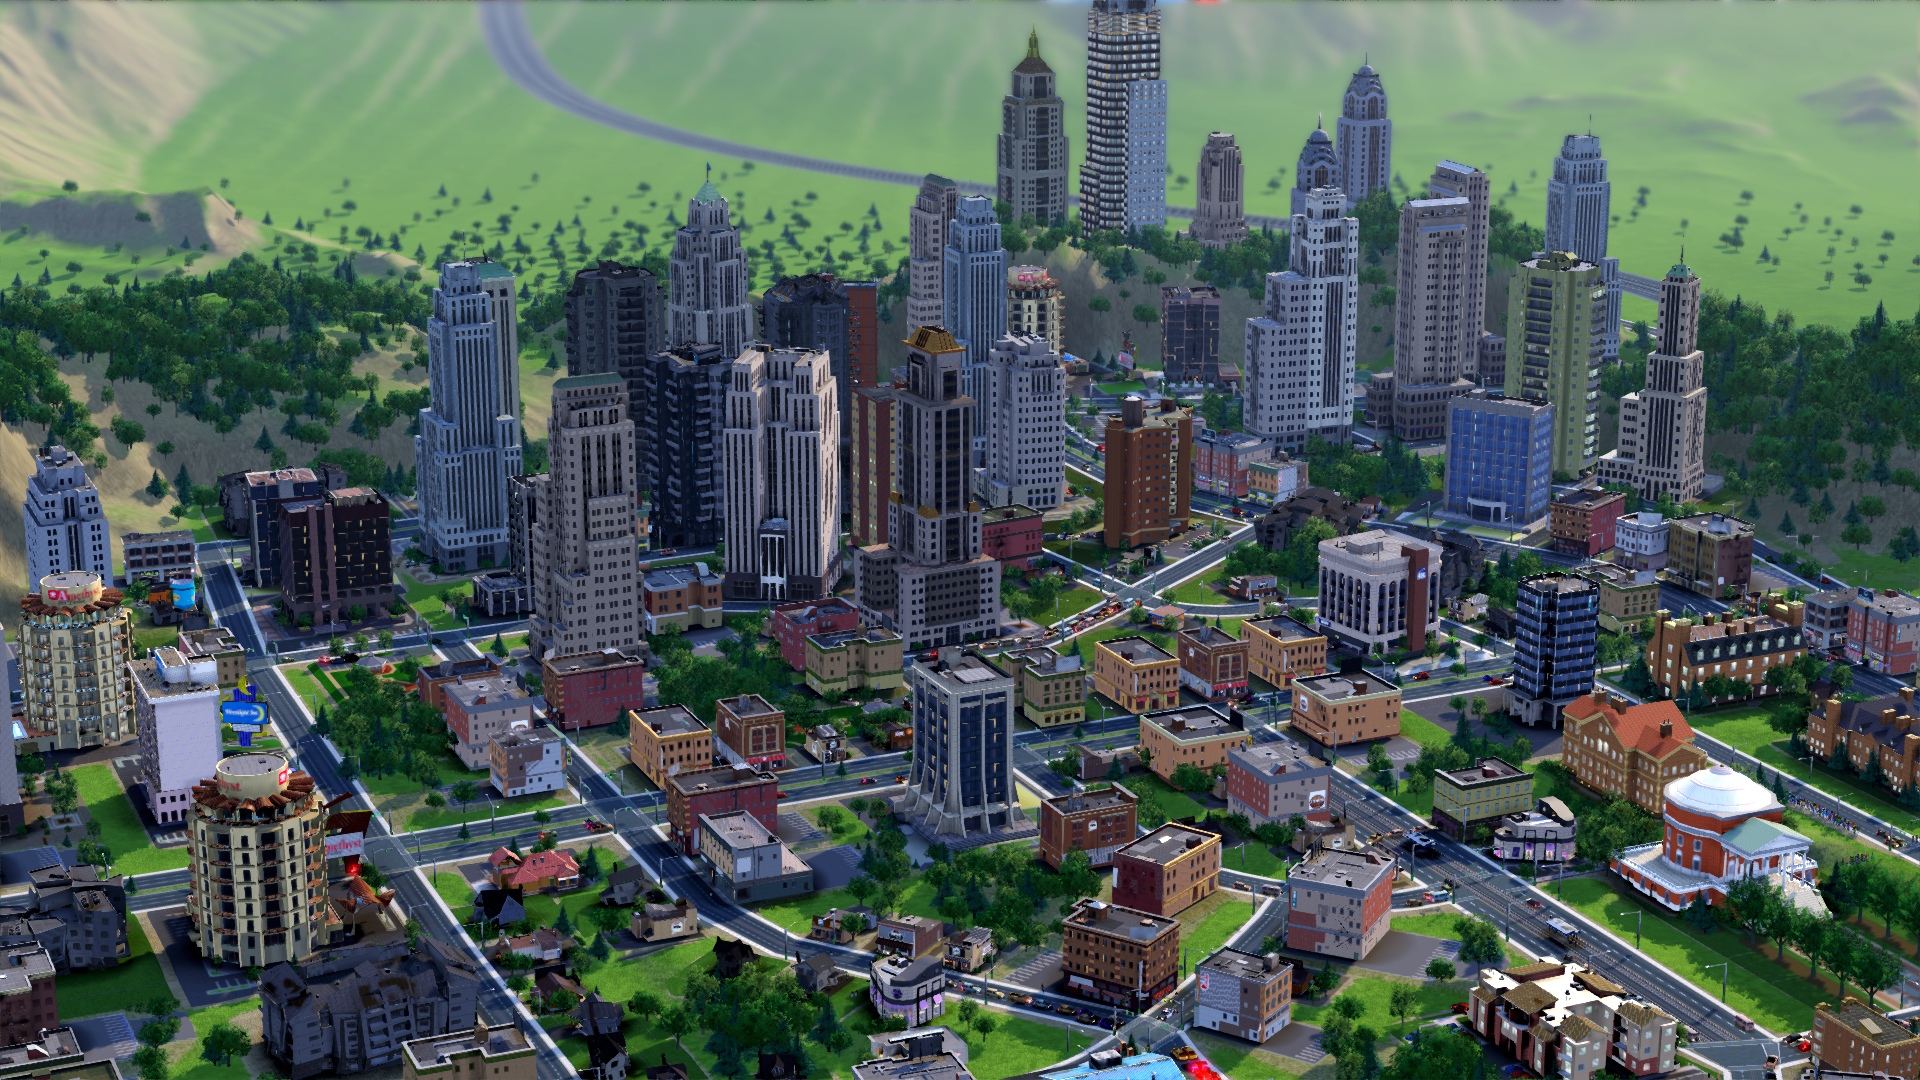 Video Game Simcity HD Wallpaper | Background Image